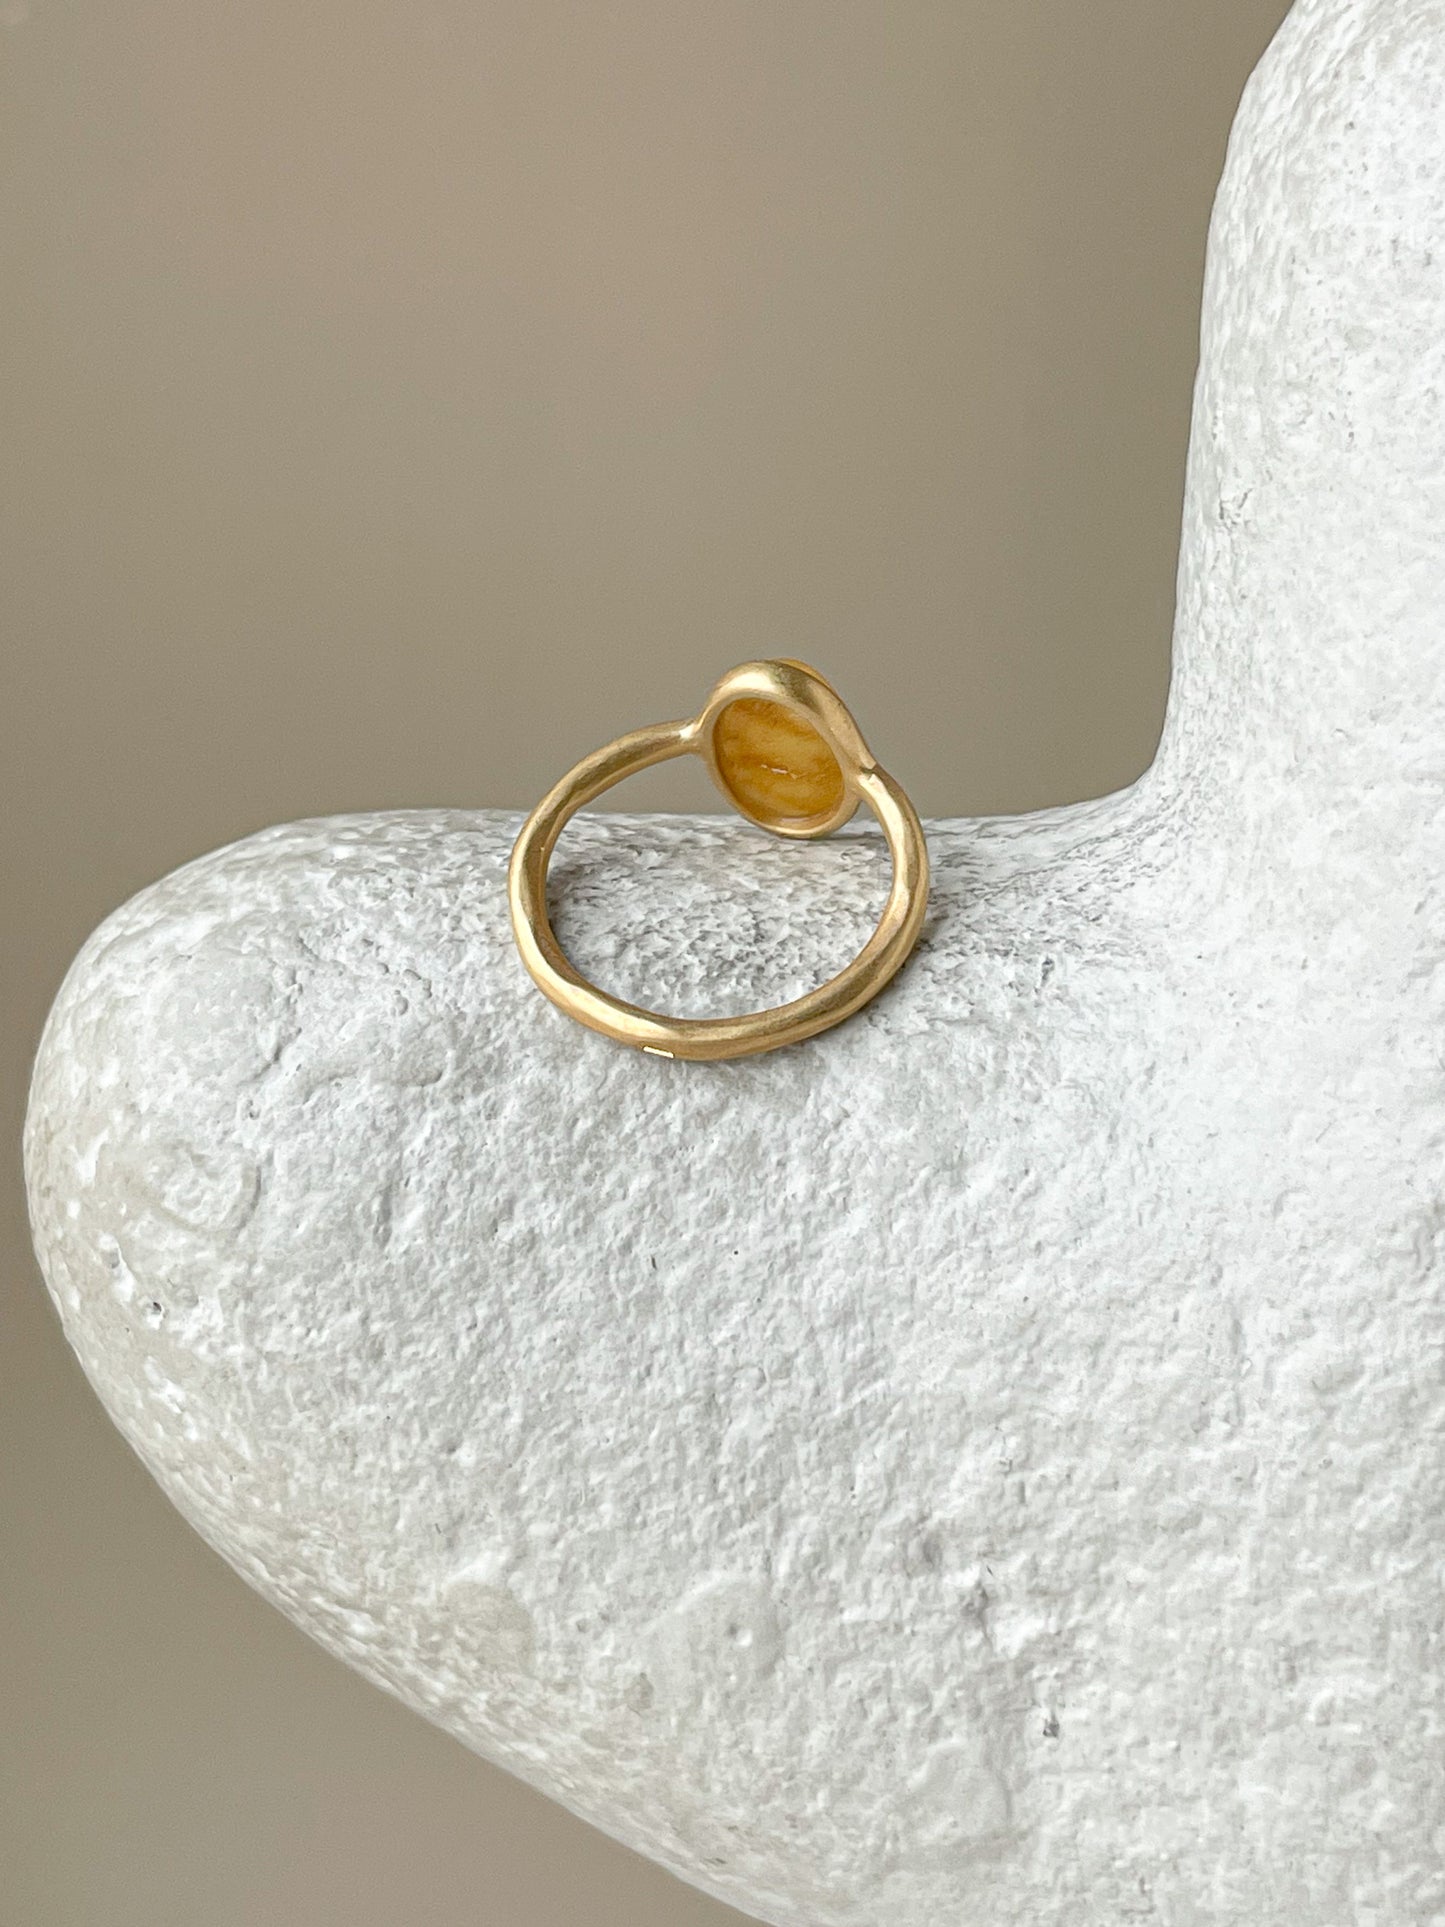 Matte amber ring - Gold plated silver - Thin ring collection- Size 5 1/2